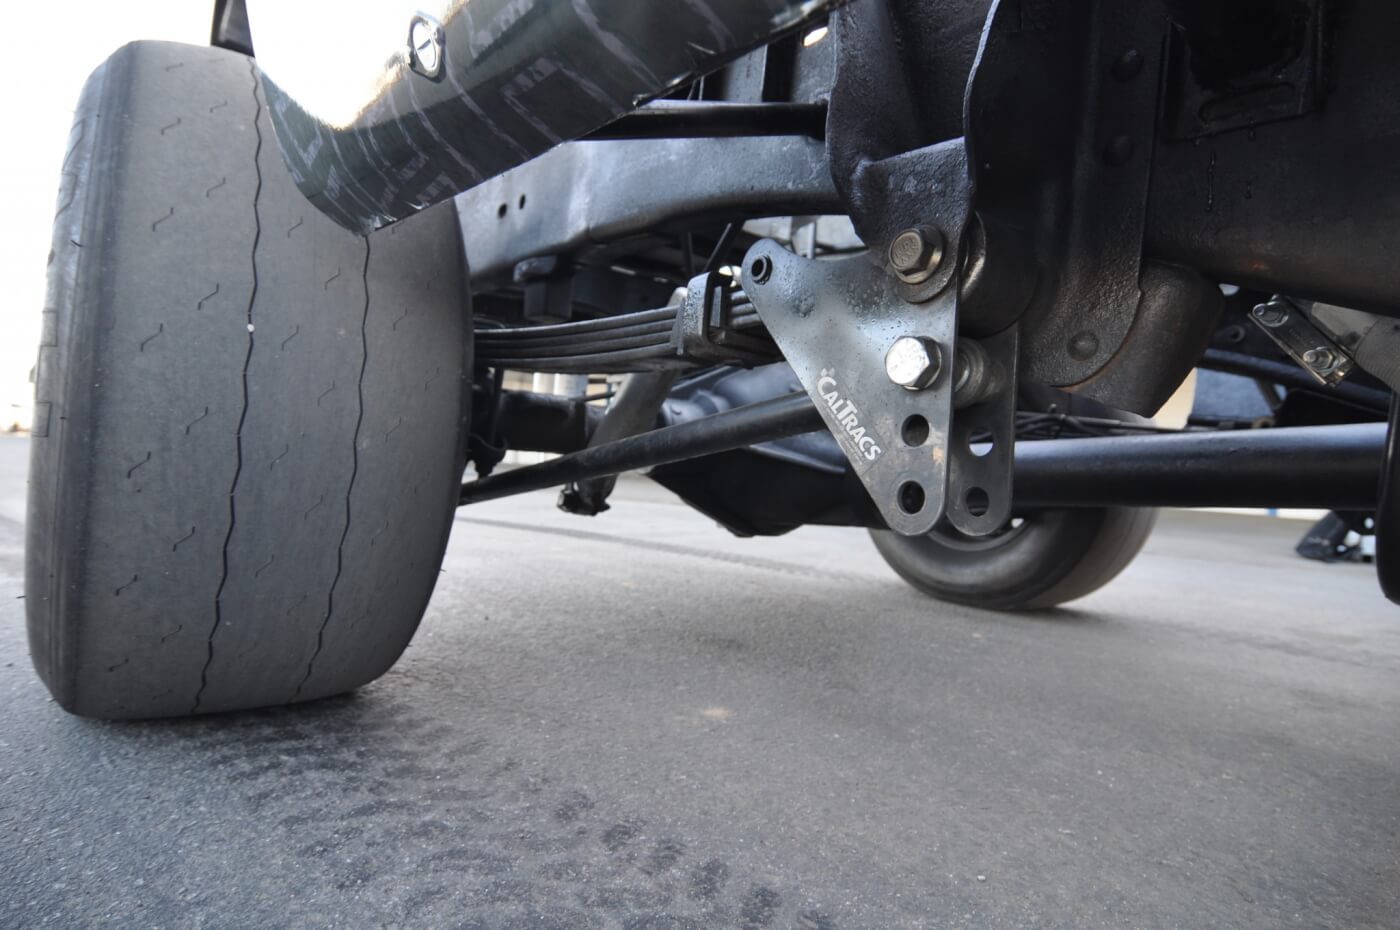 CalTracs traction bars are essential to reducing axle wrap and increasing traction. Of course, the race slicks are a big part of the traction equation too.